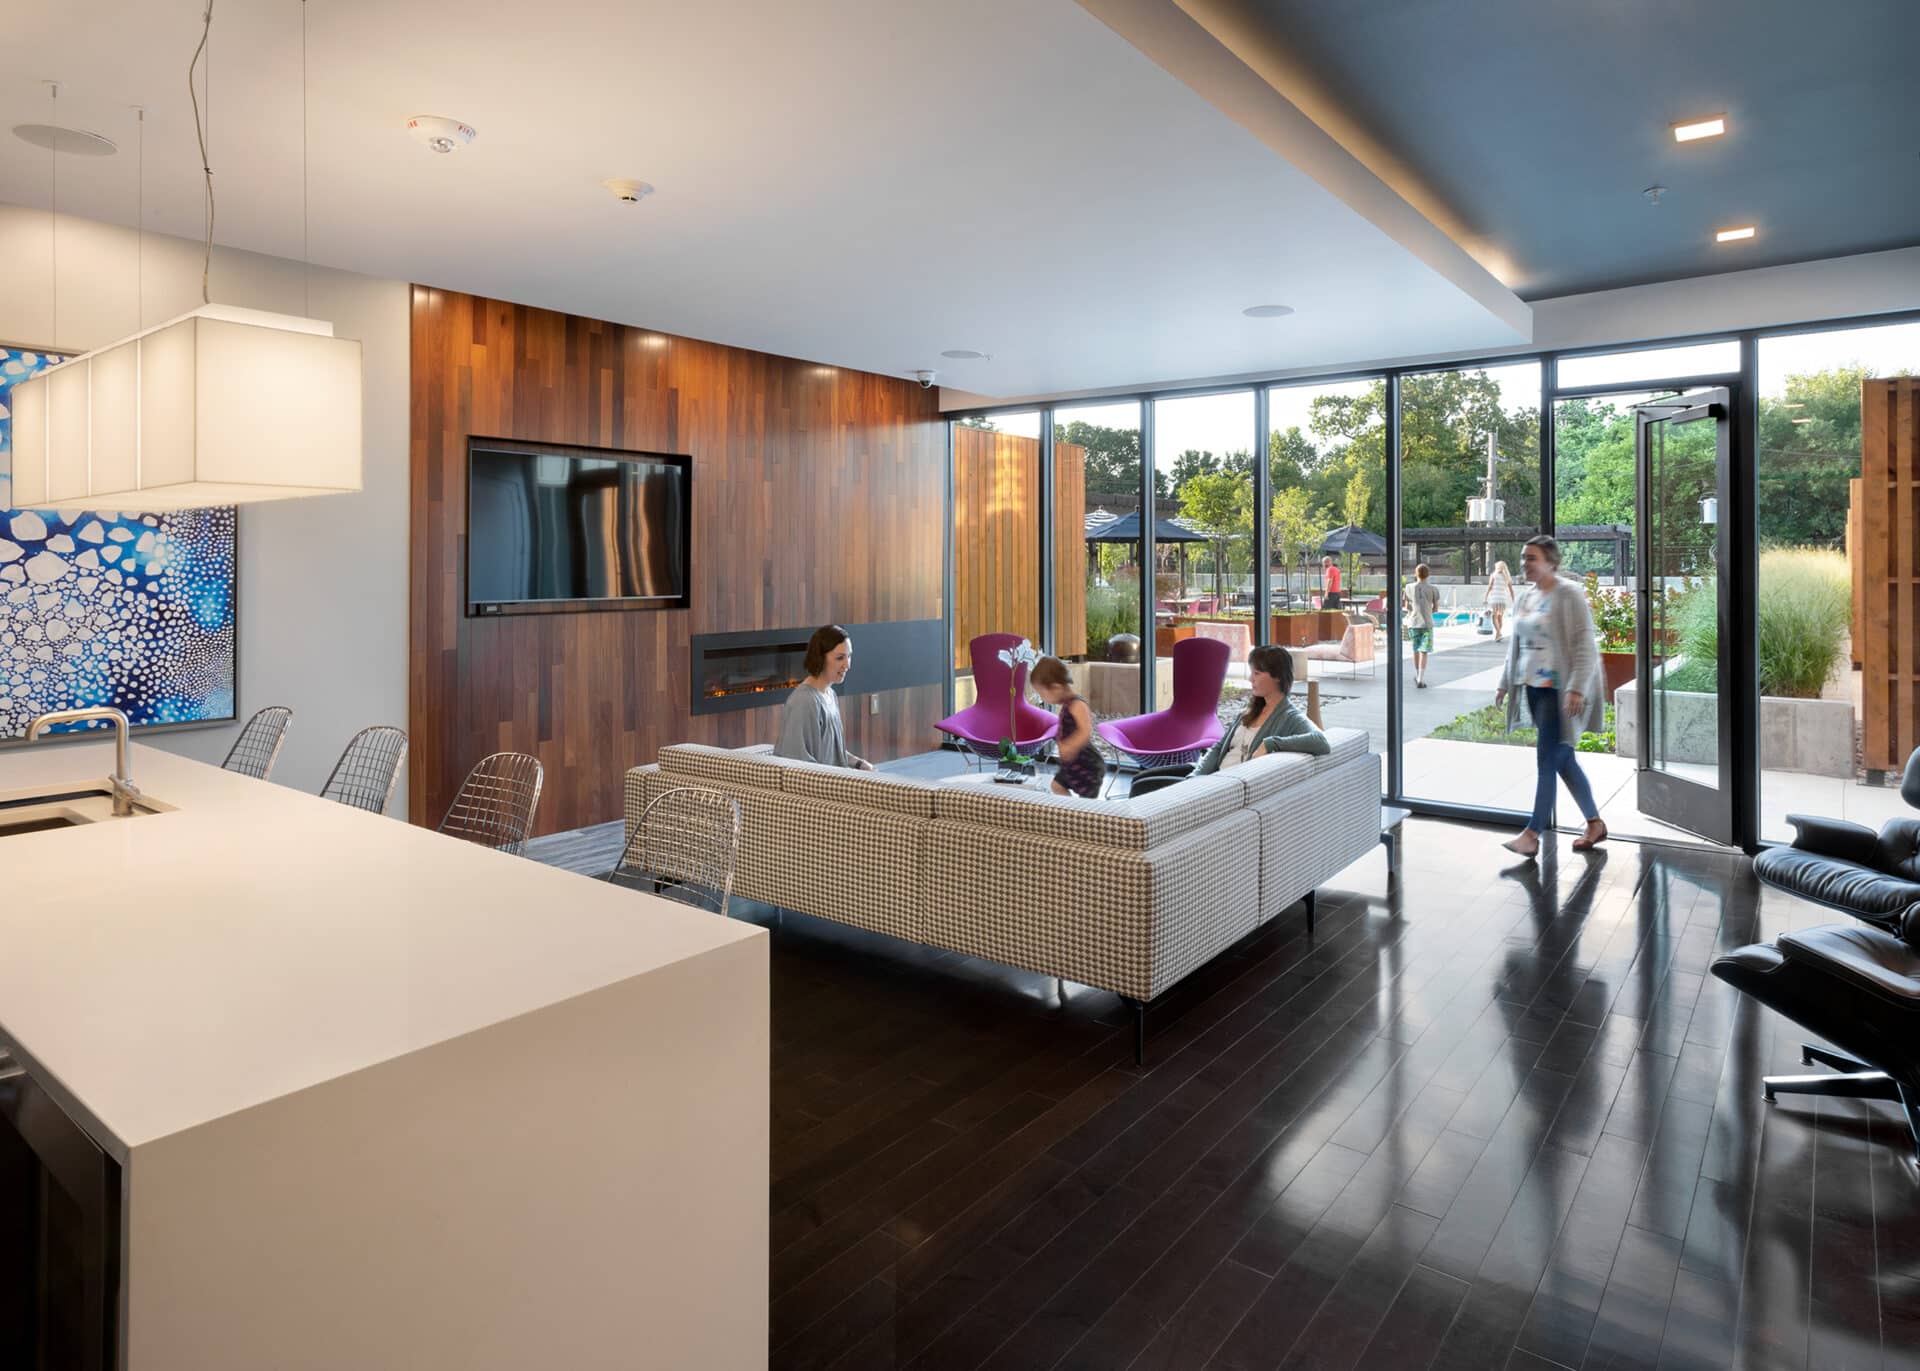 interior of laclede apartments amenity deck designed by trivers architectural firm